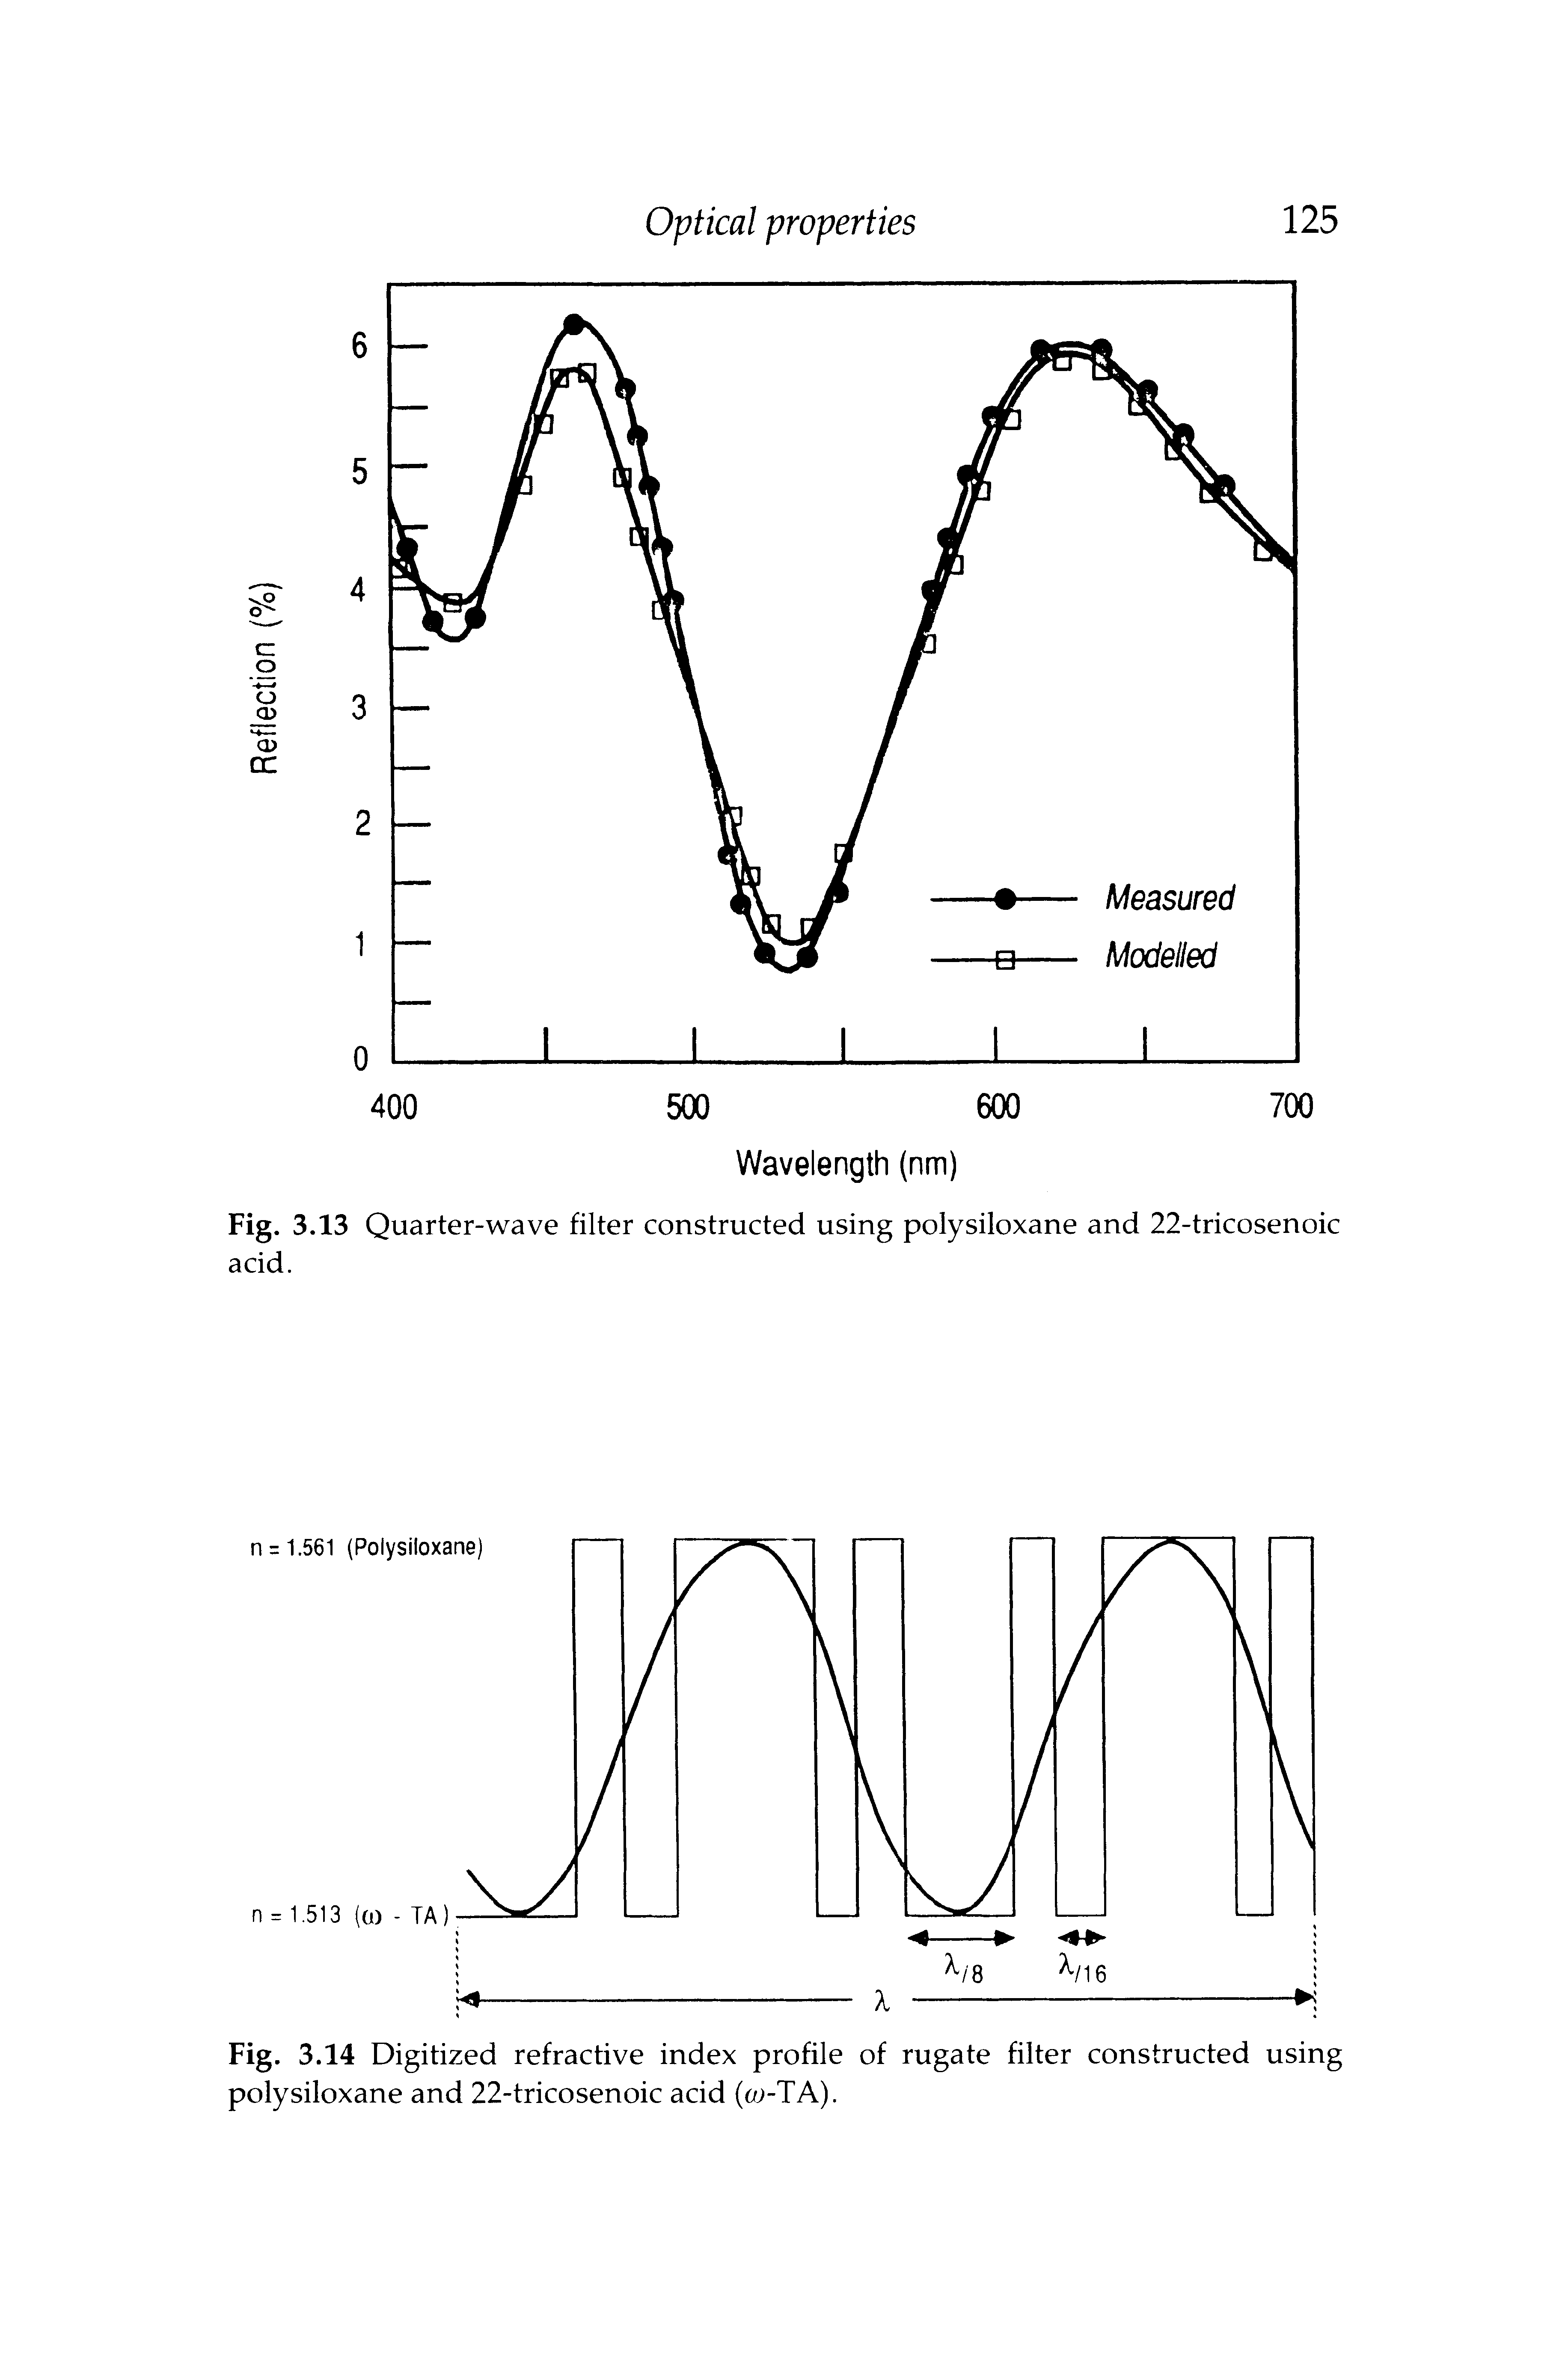 Fig. 3.14 Digitized refractive index profile of rugate filter constructed using polysiloxane and 22-tricosenoic acid (oj-TA).